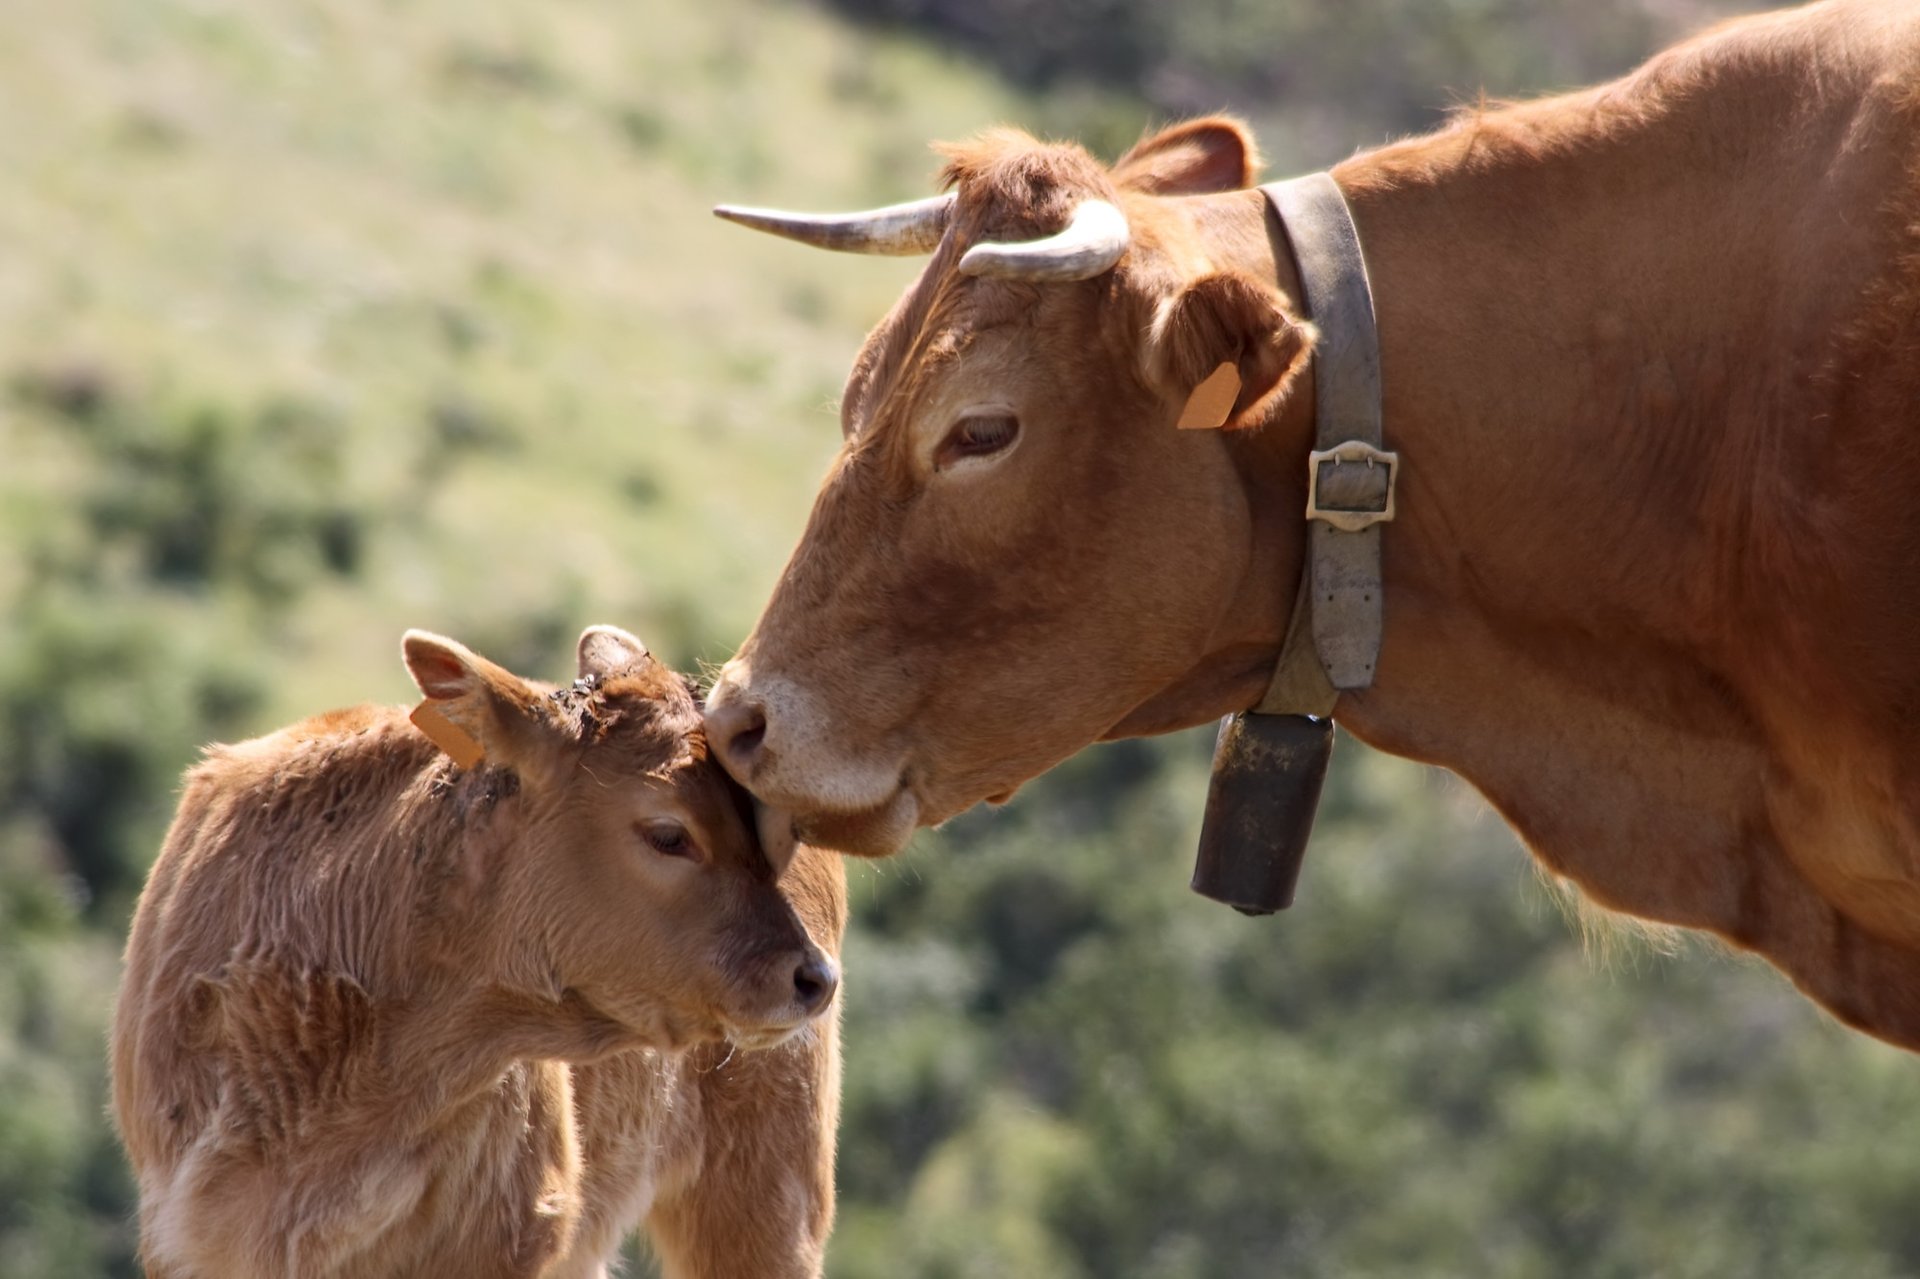 A brown mother cow licking the face of a smaller cow